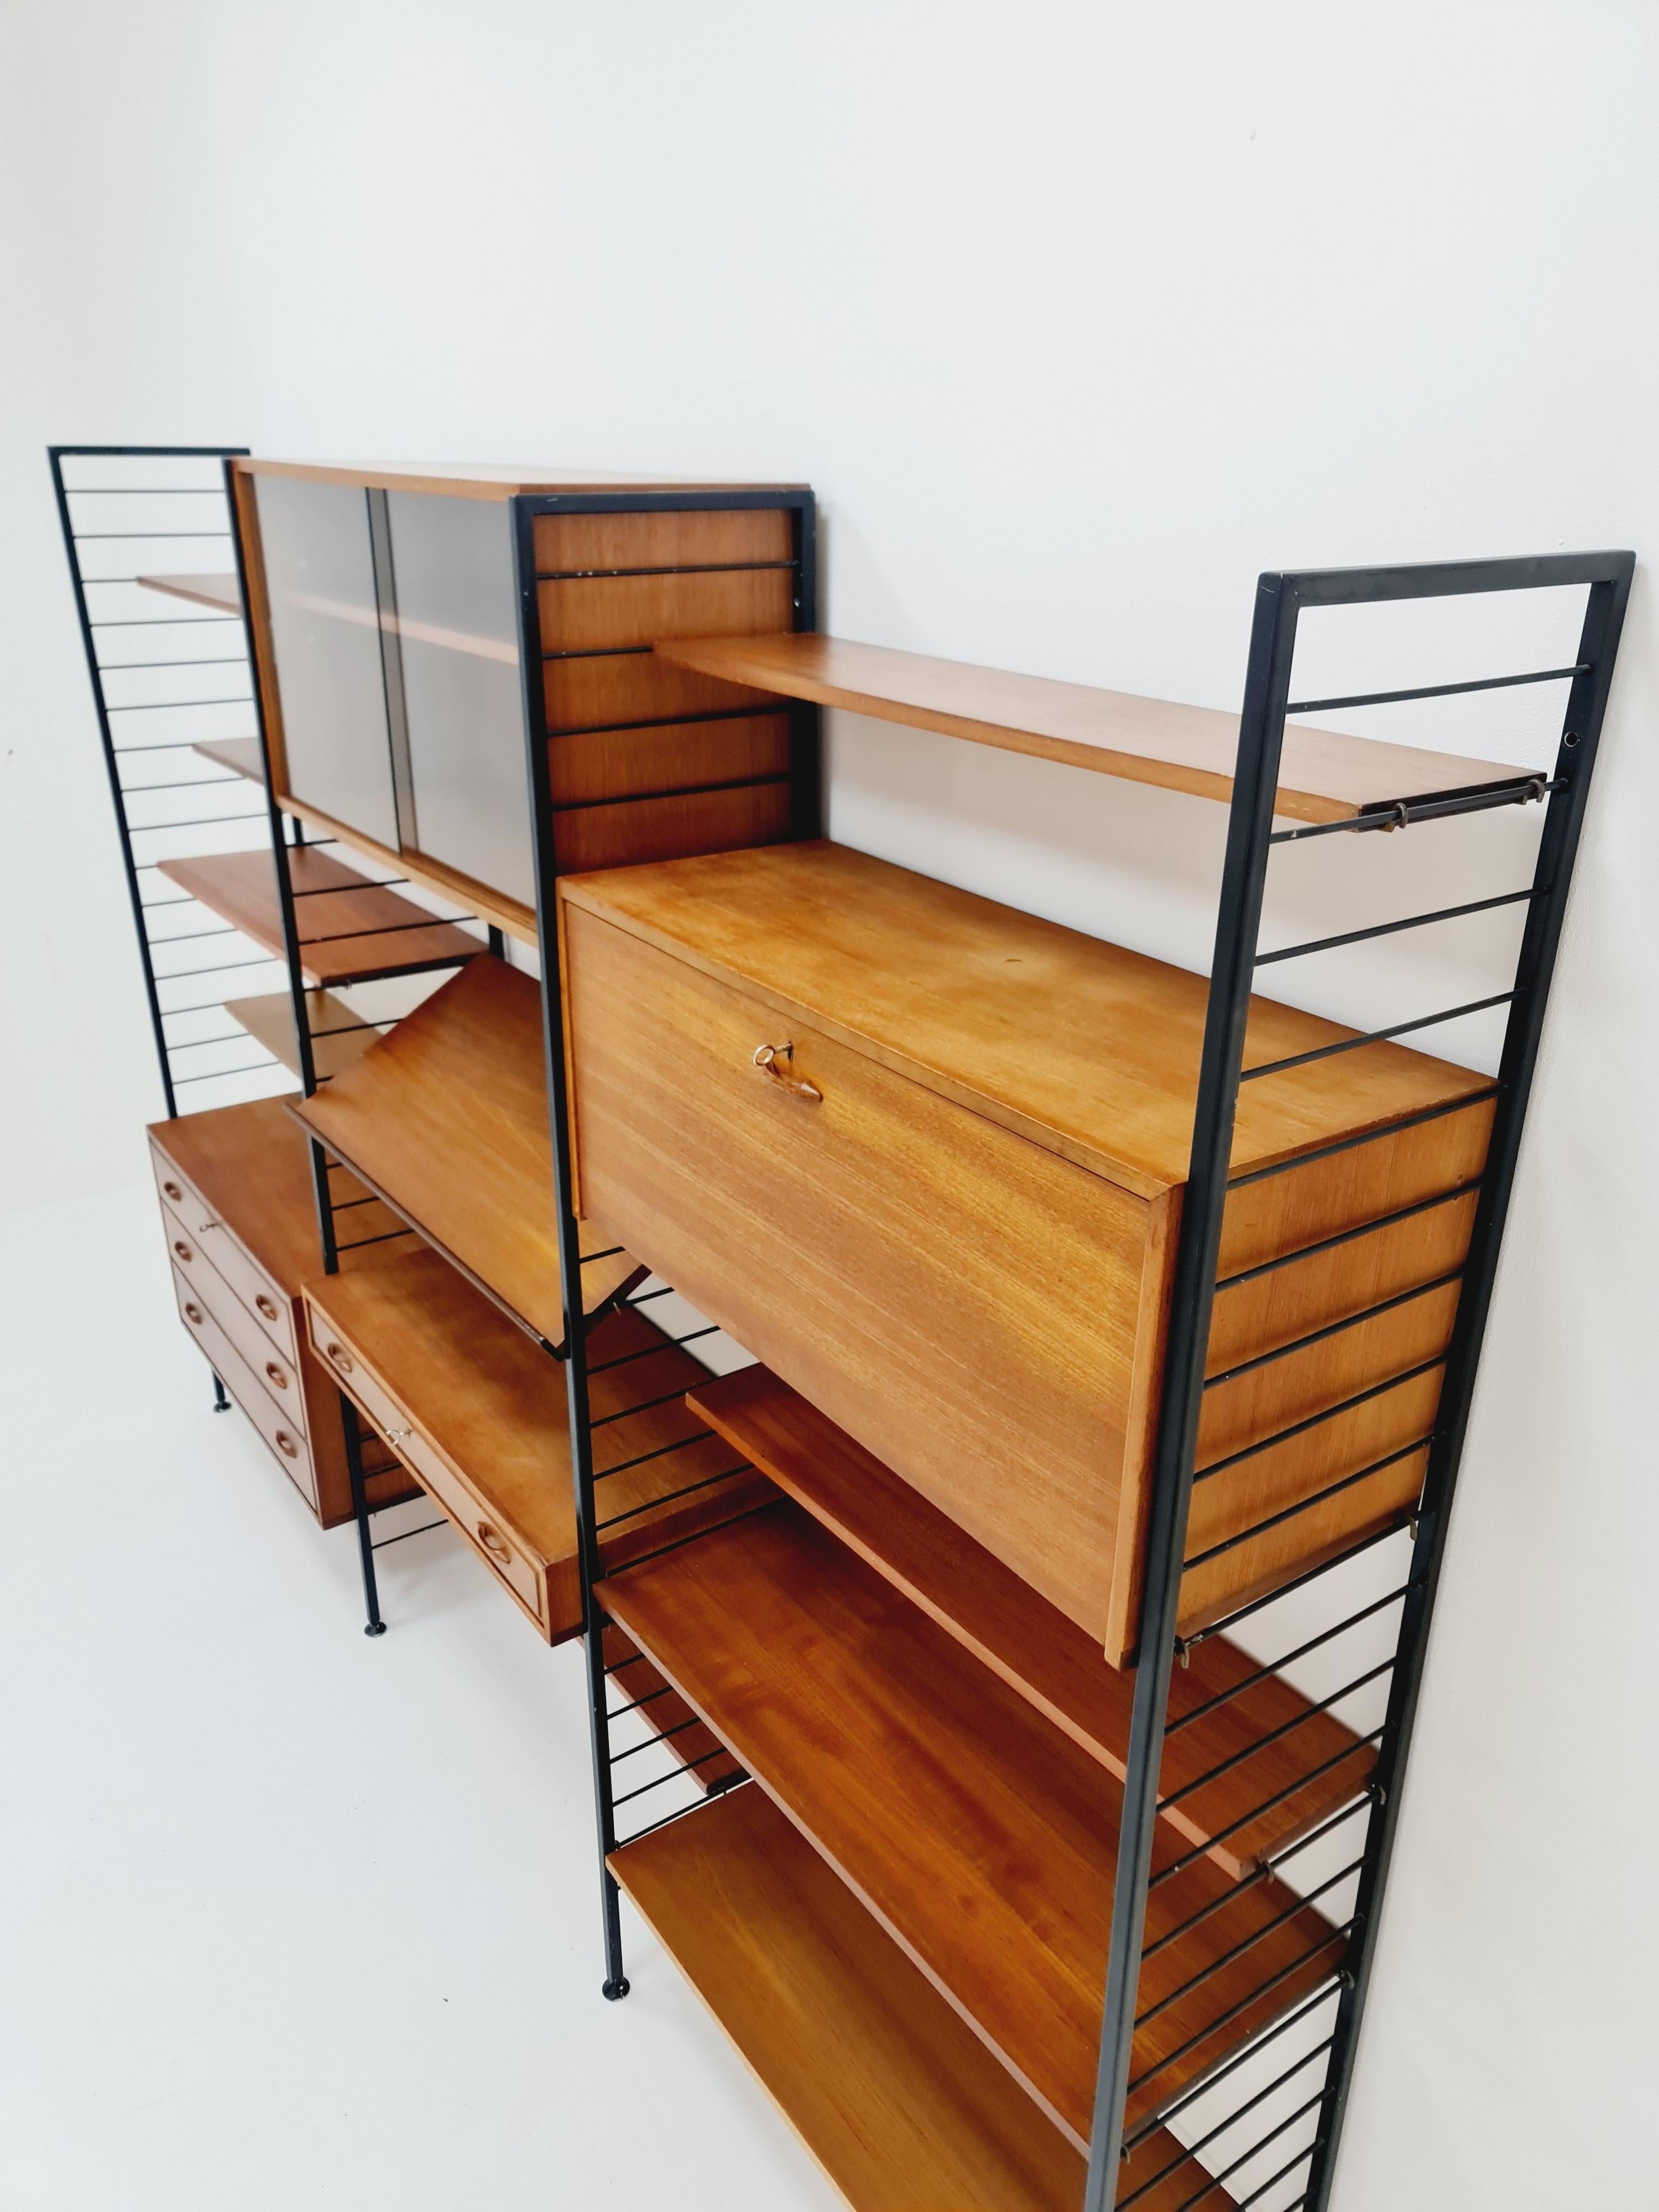 Free standing Mid century modular unit shelving system by Staples Ladderax 1